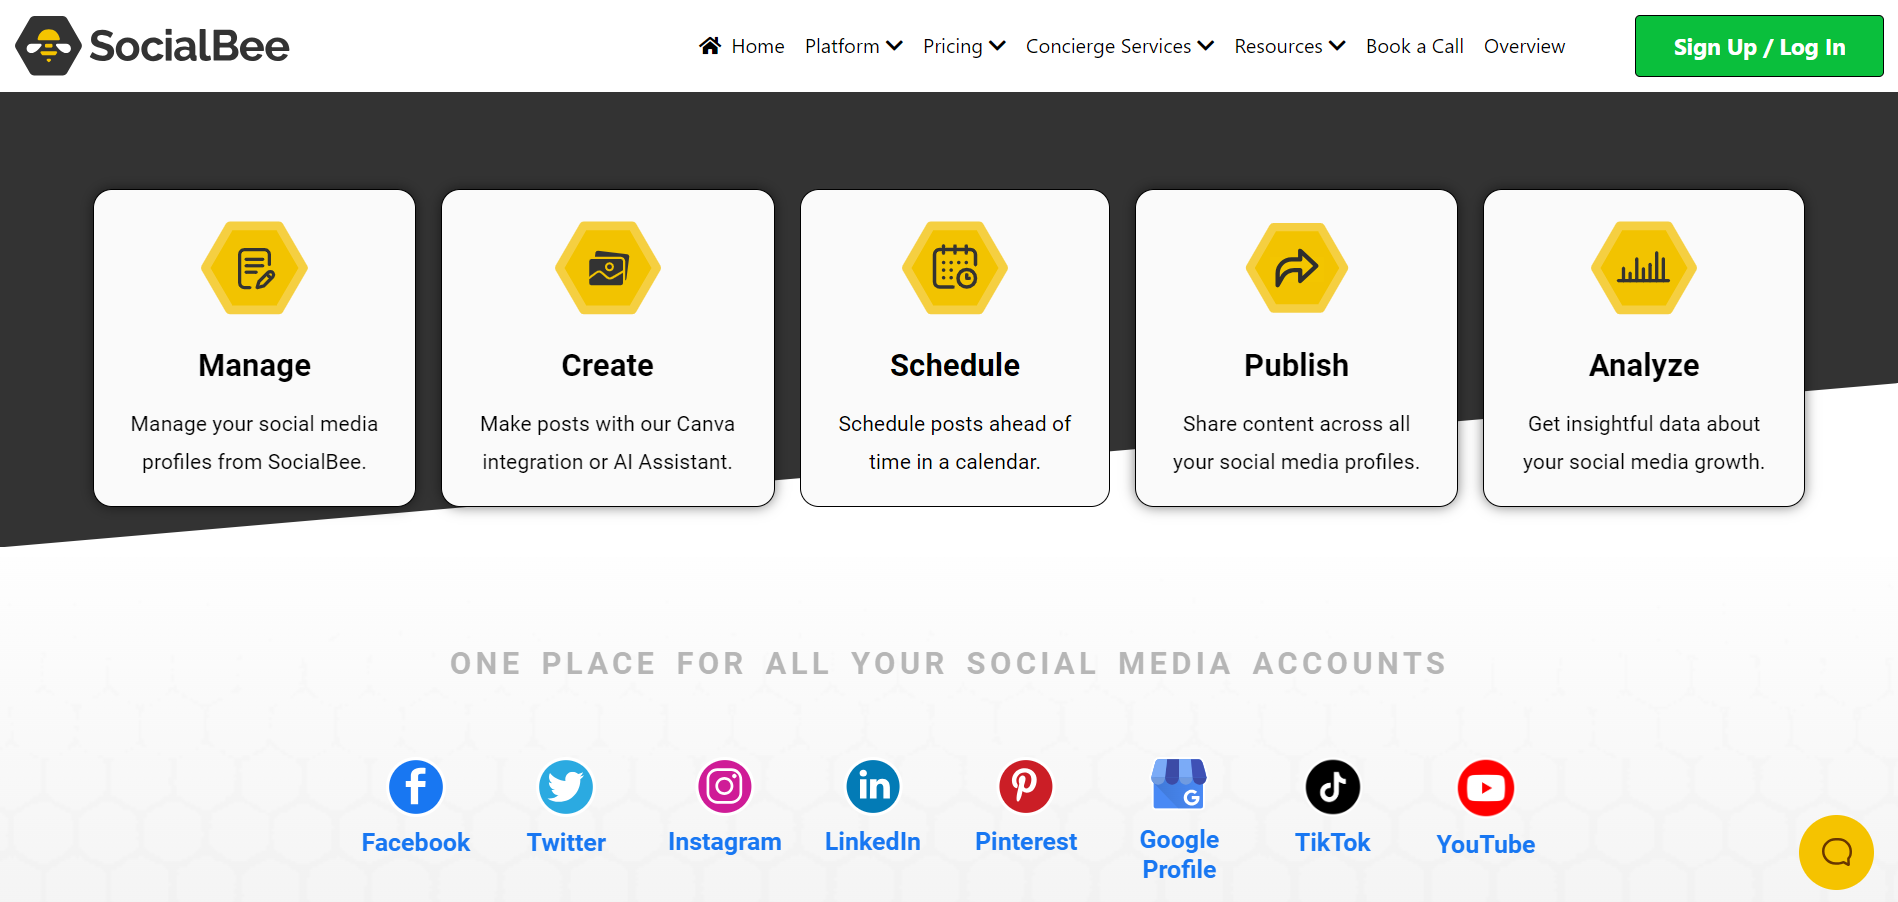 SocialBee is a comprehensive solution